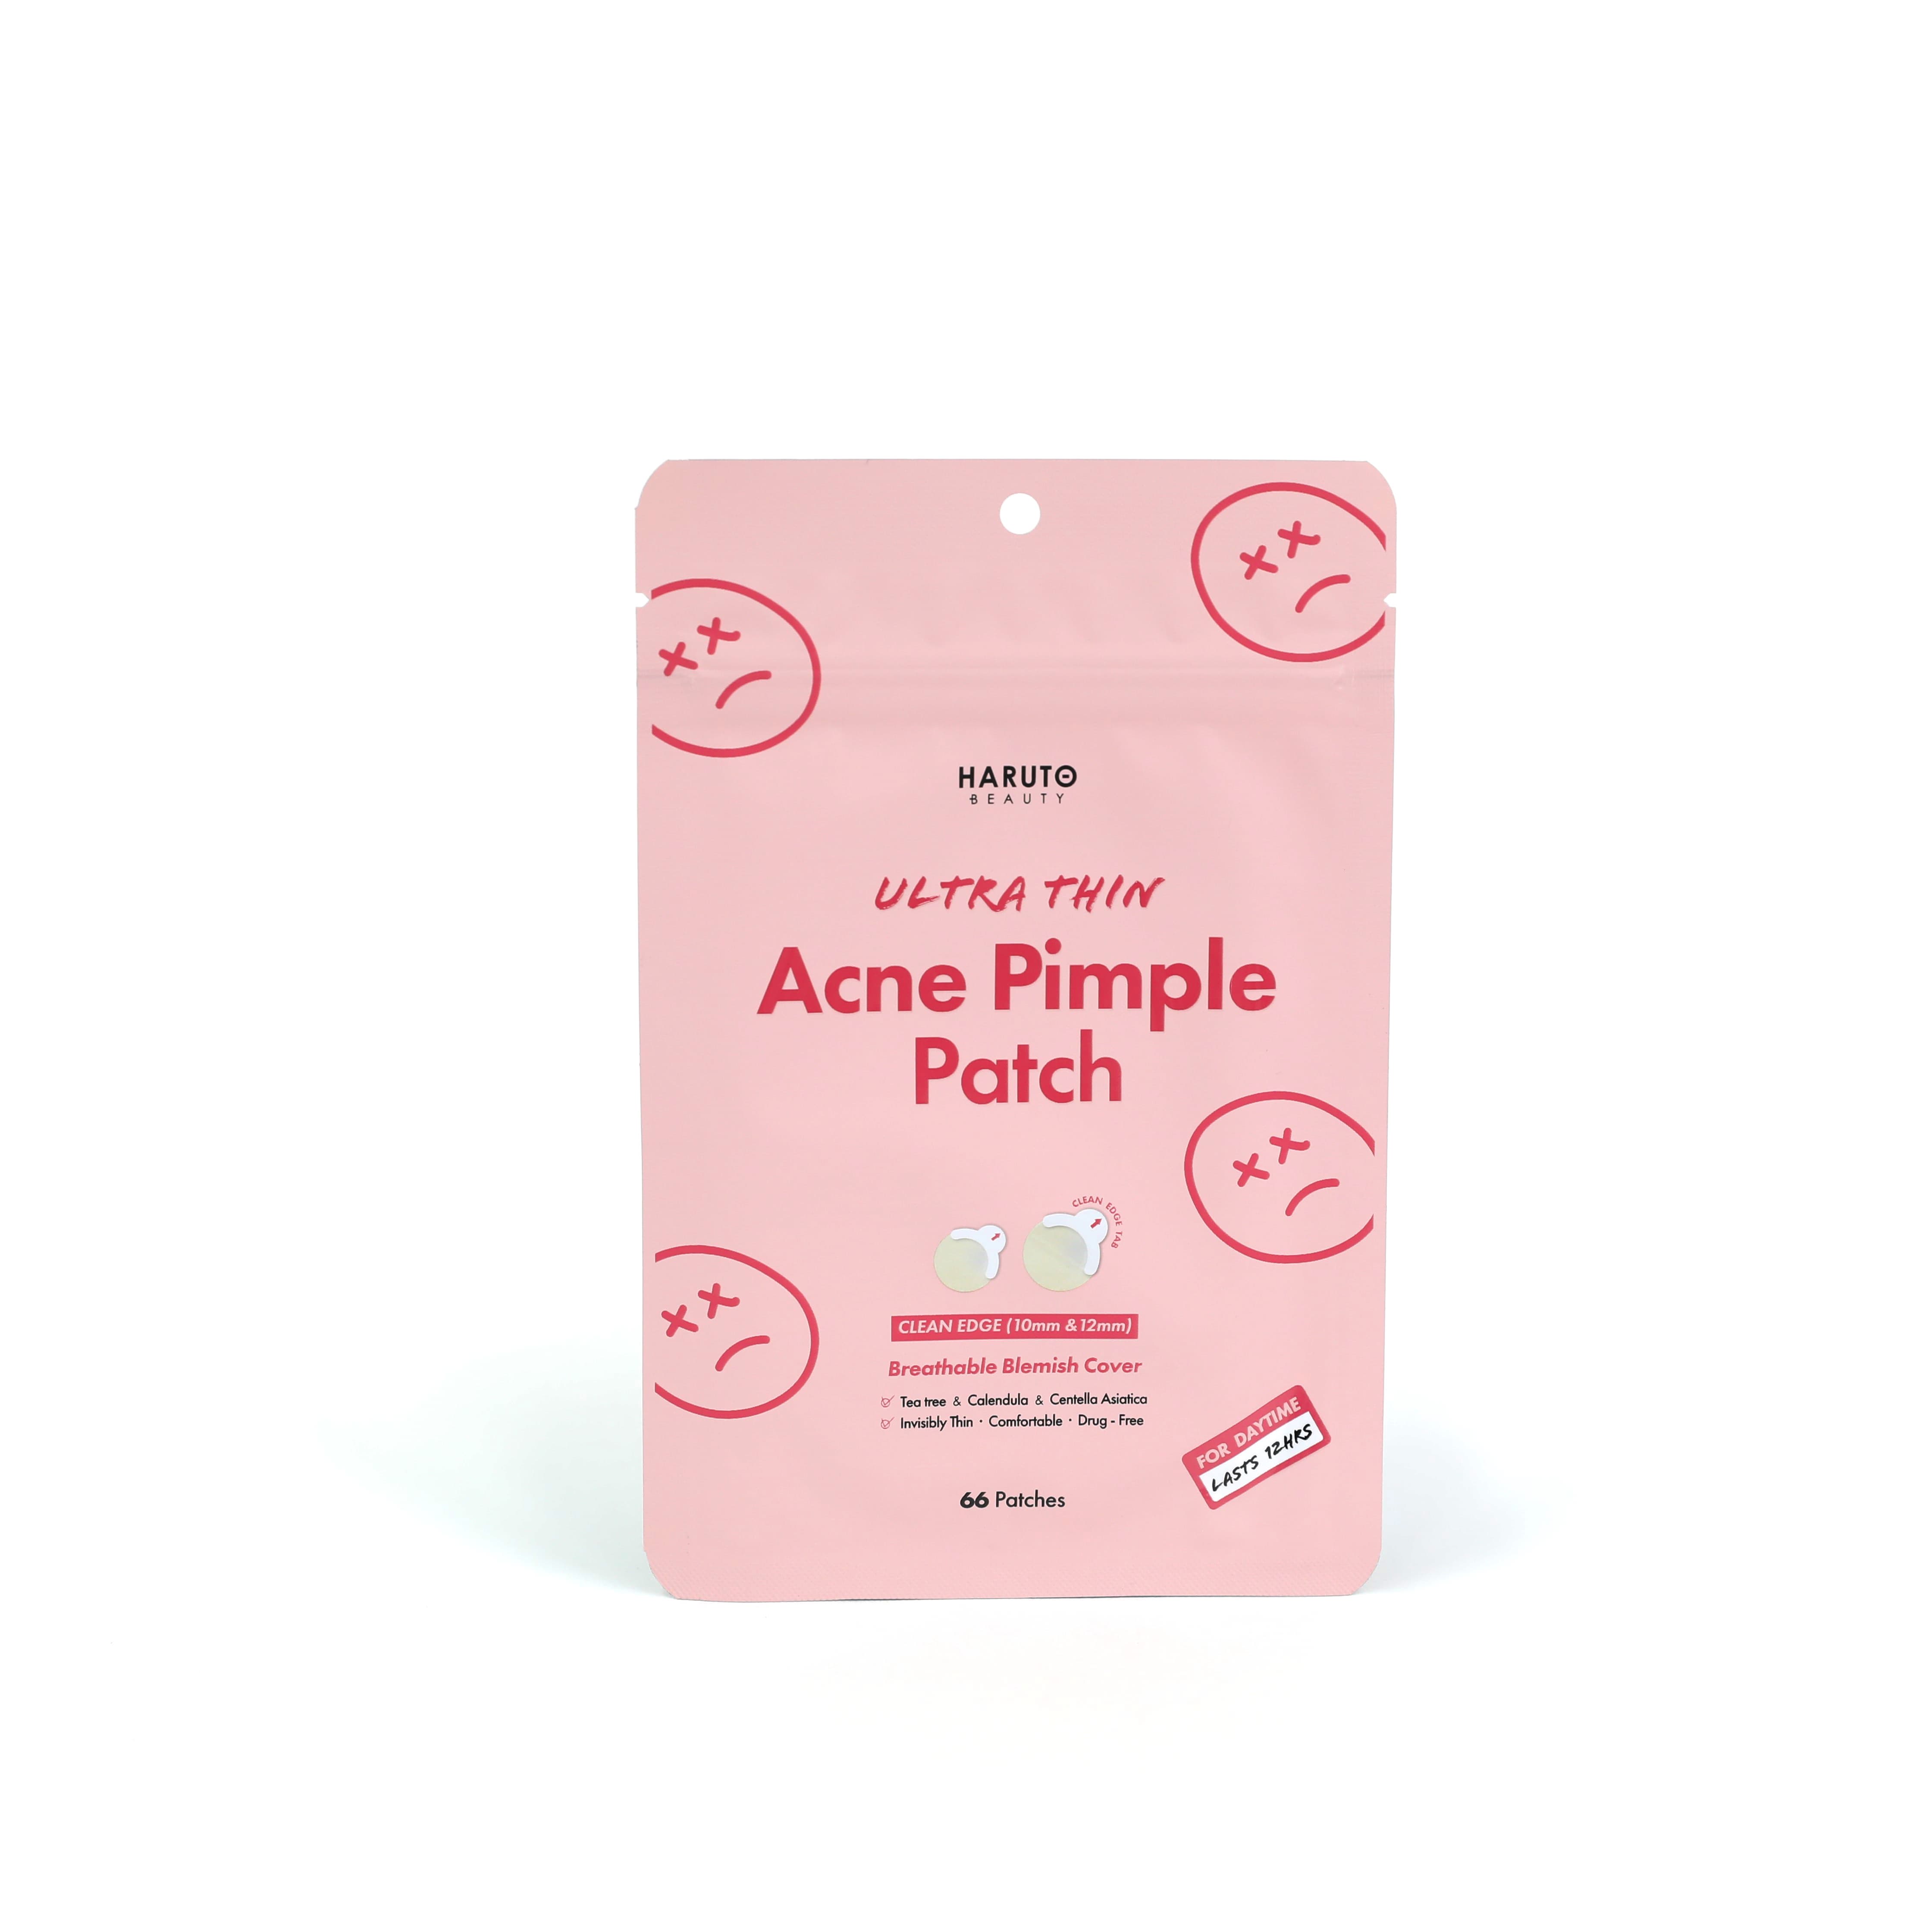 Ultra Thin Acne Pimple Patch